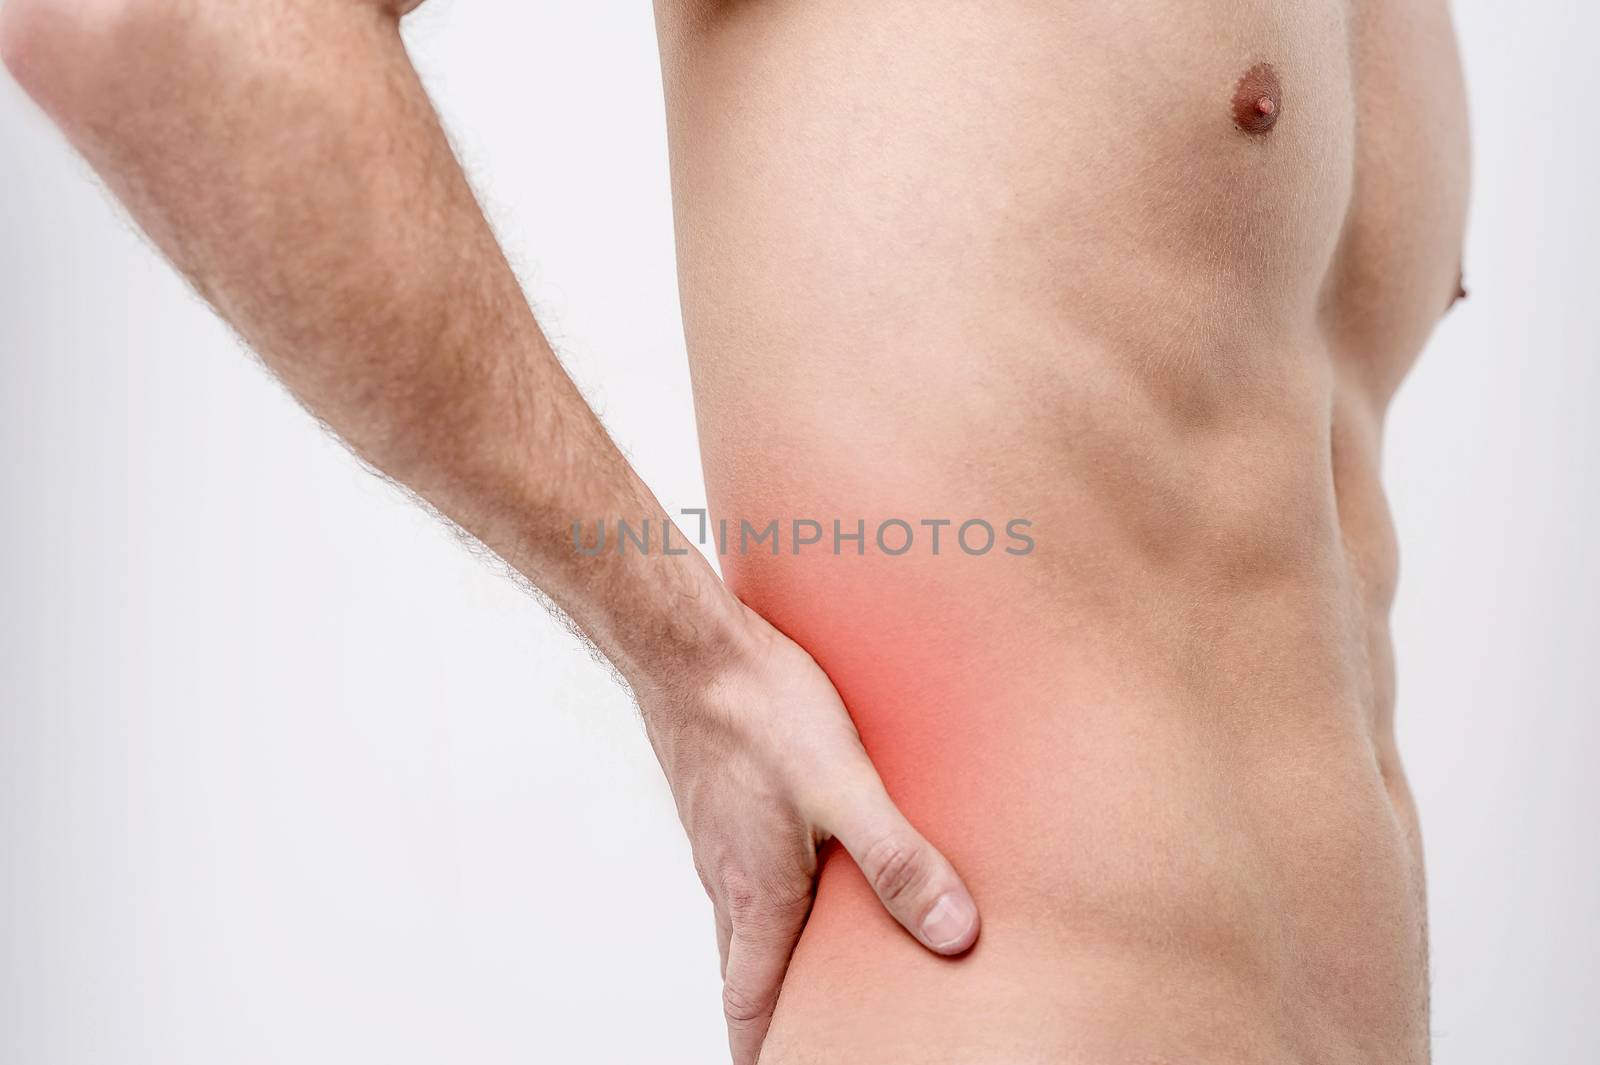 Man with back pain in red zone by stockyimages